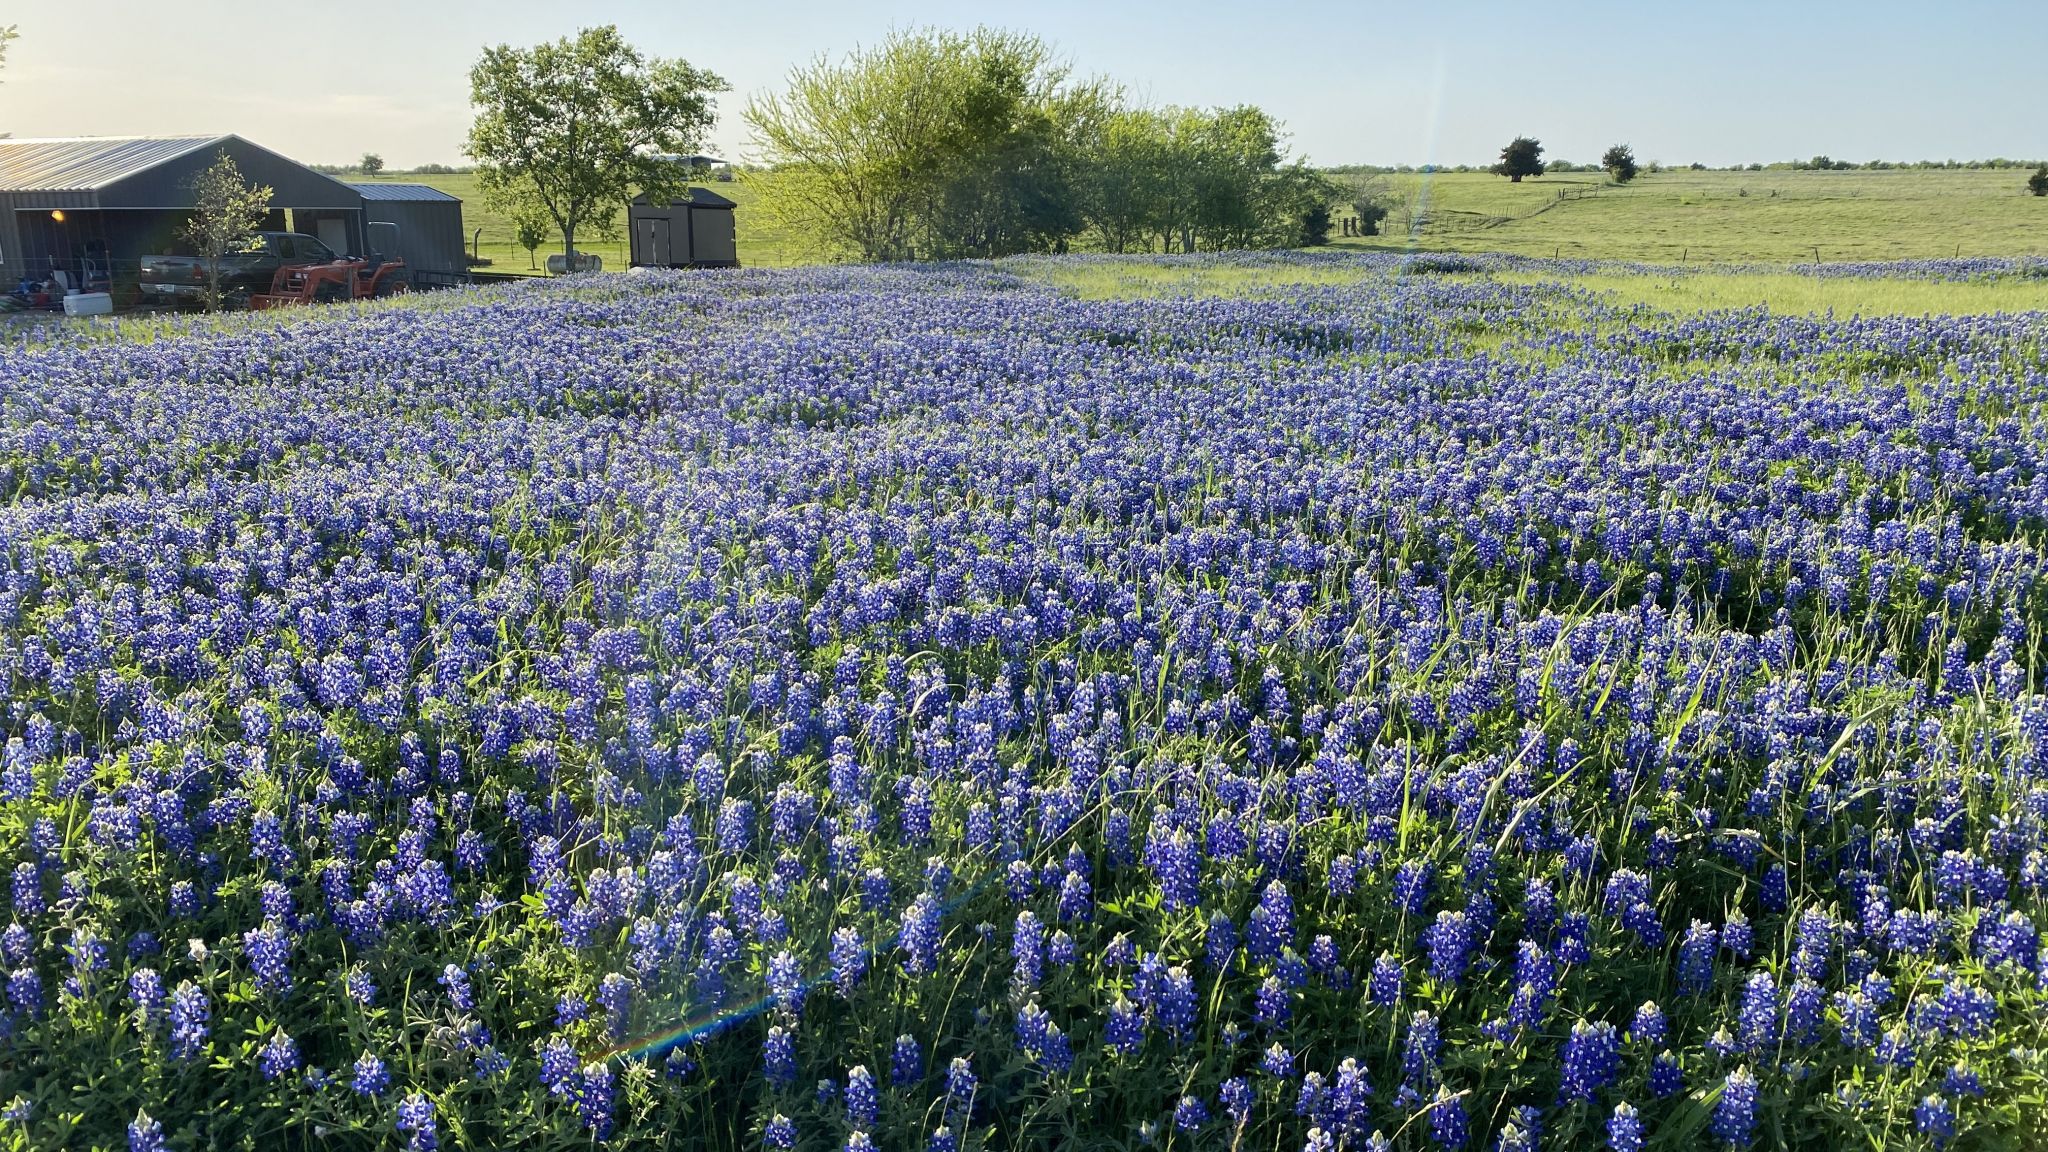 Texas' most beautiful can be found along the Ennis